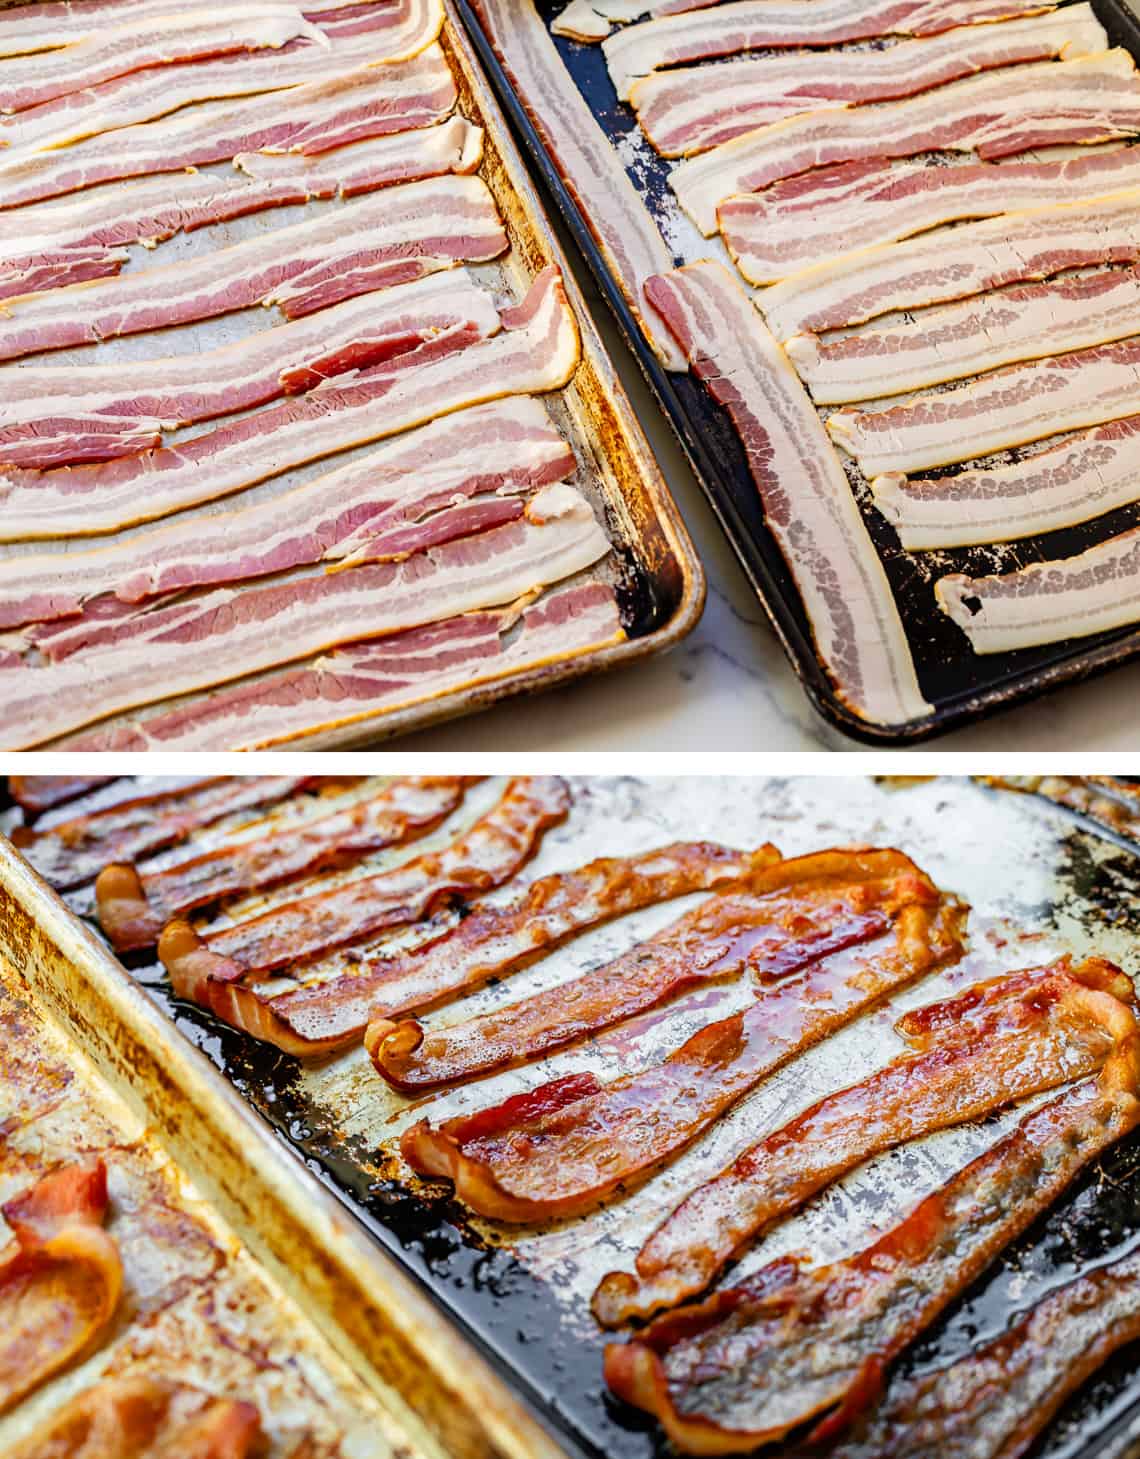 double photo of uncooked bacon on baking sheet with bottom photo of cooked crispy bacon after baking.